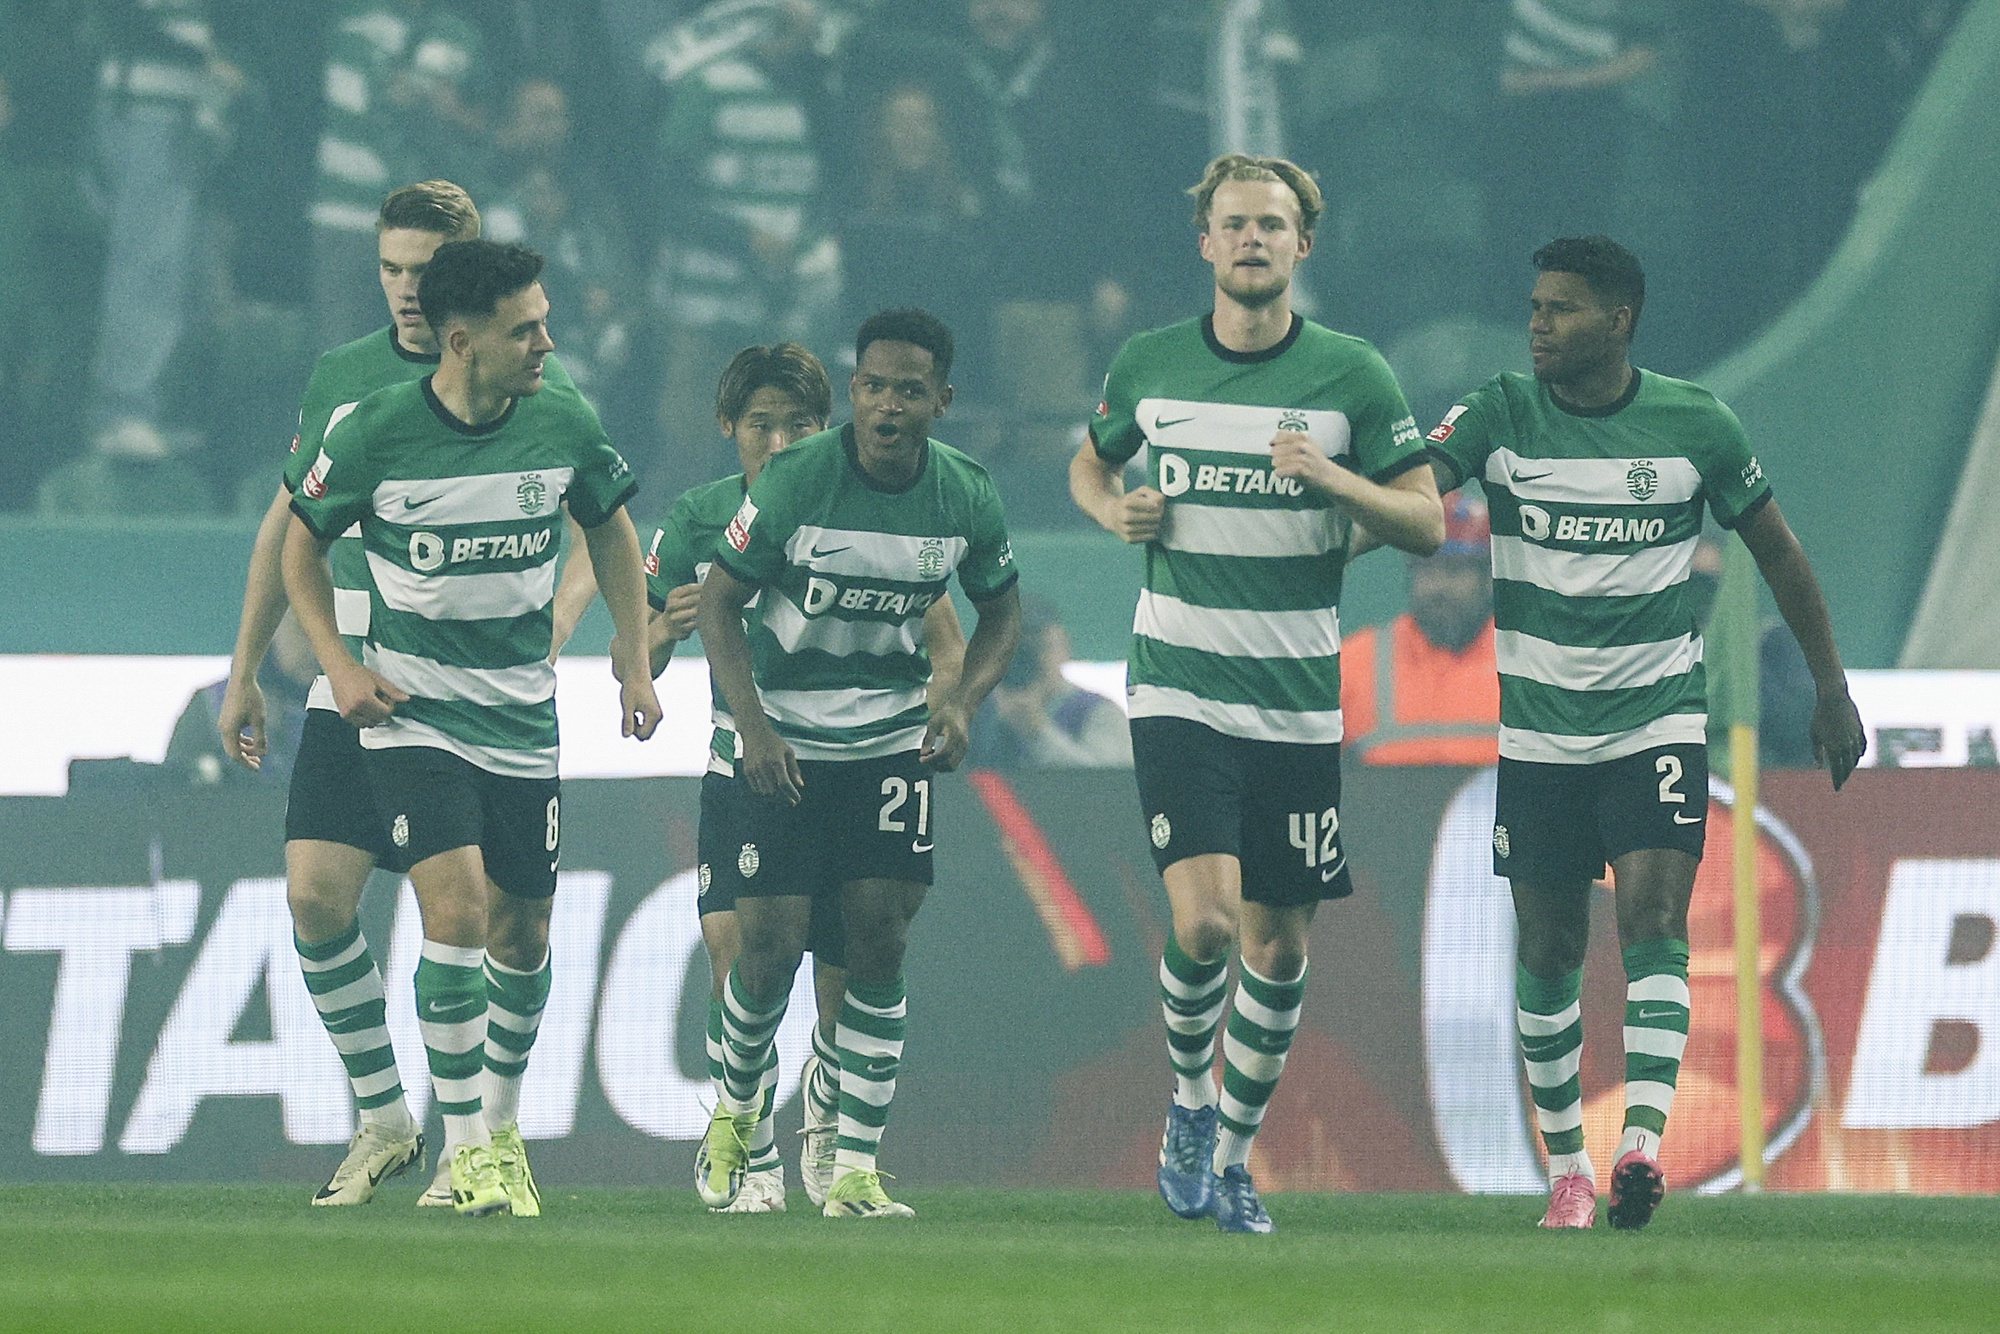 Sporting player Geny Catamo (C) celebrates with his team mates after scoring a goal againt Benfica during their Portuguese First League soccer match held at Alvalade Stadium, in Lisbon, Portugal, 6 April 2024. MIGUEL A. LOPES/LUSA